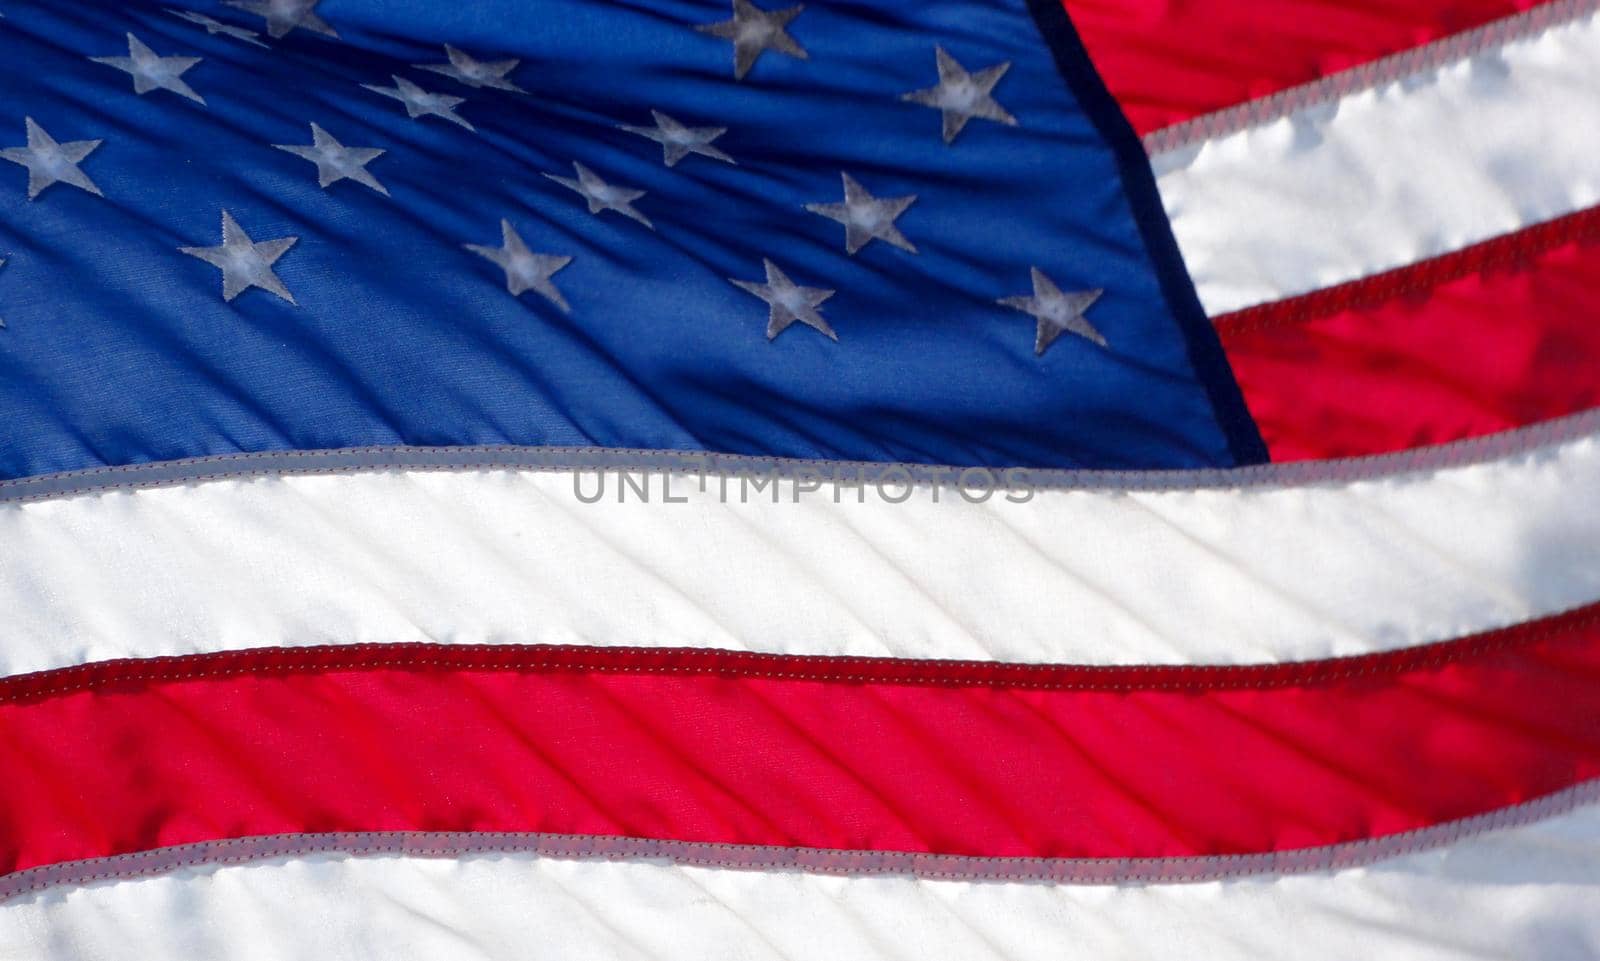 USA Flag waves in the wind with light illuminating the cloth.